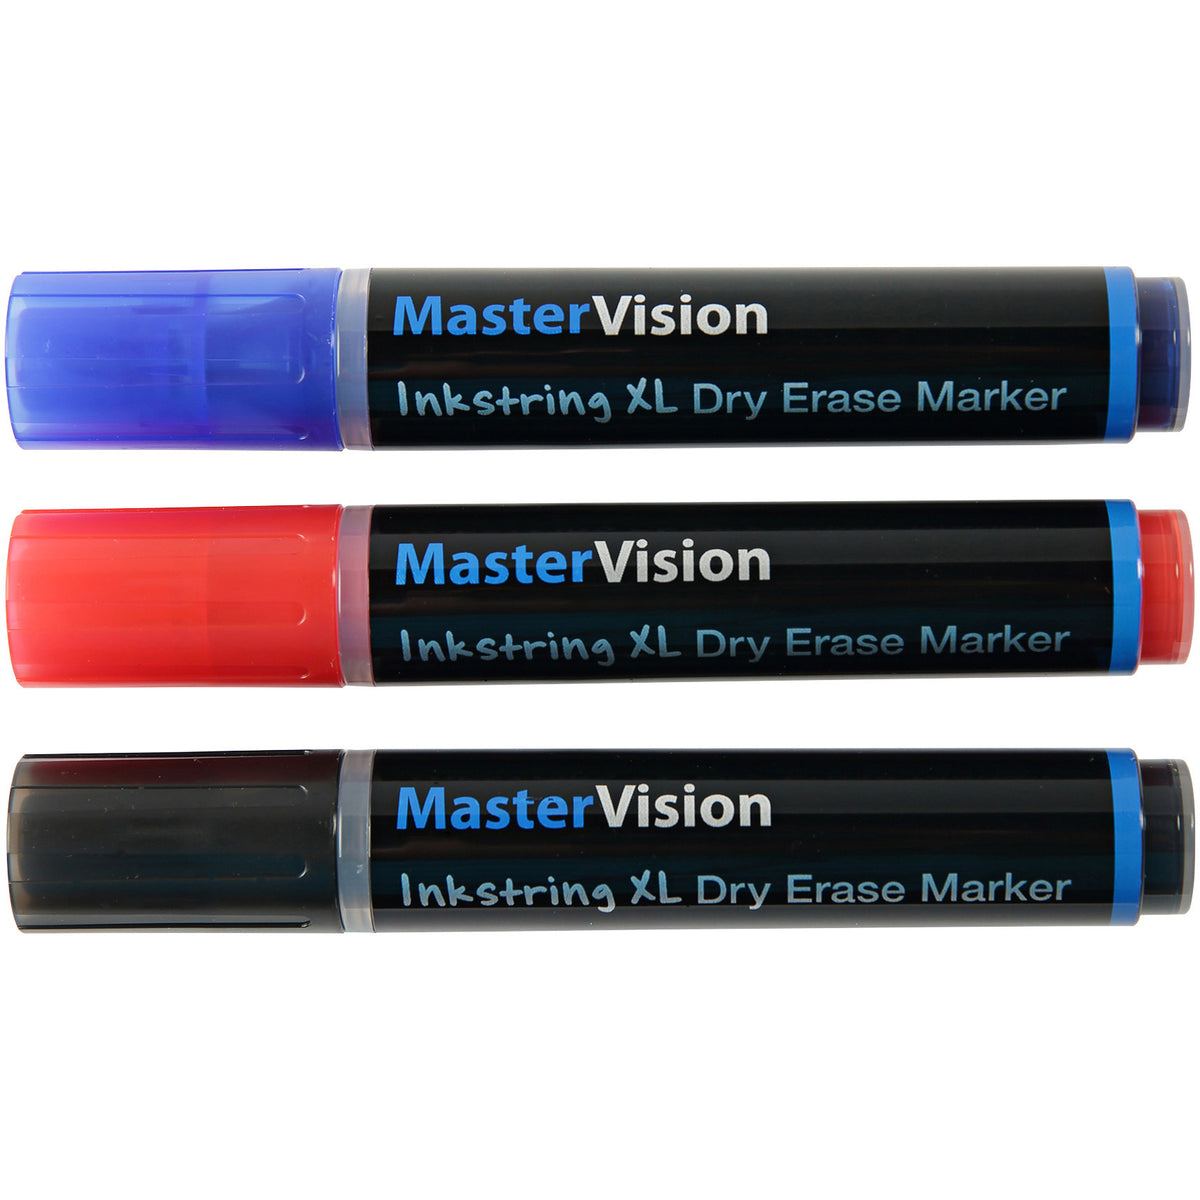 PE4104 Inkstring XL Dry Erase Markers, Assorted Box of 3, Black, Blue, Red, Dust-free Design Prevents Ghosting On Boards, Large Ink Supply, Long Lasting by MasterVision